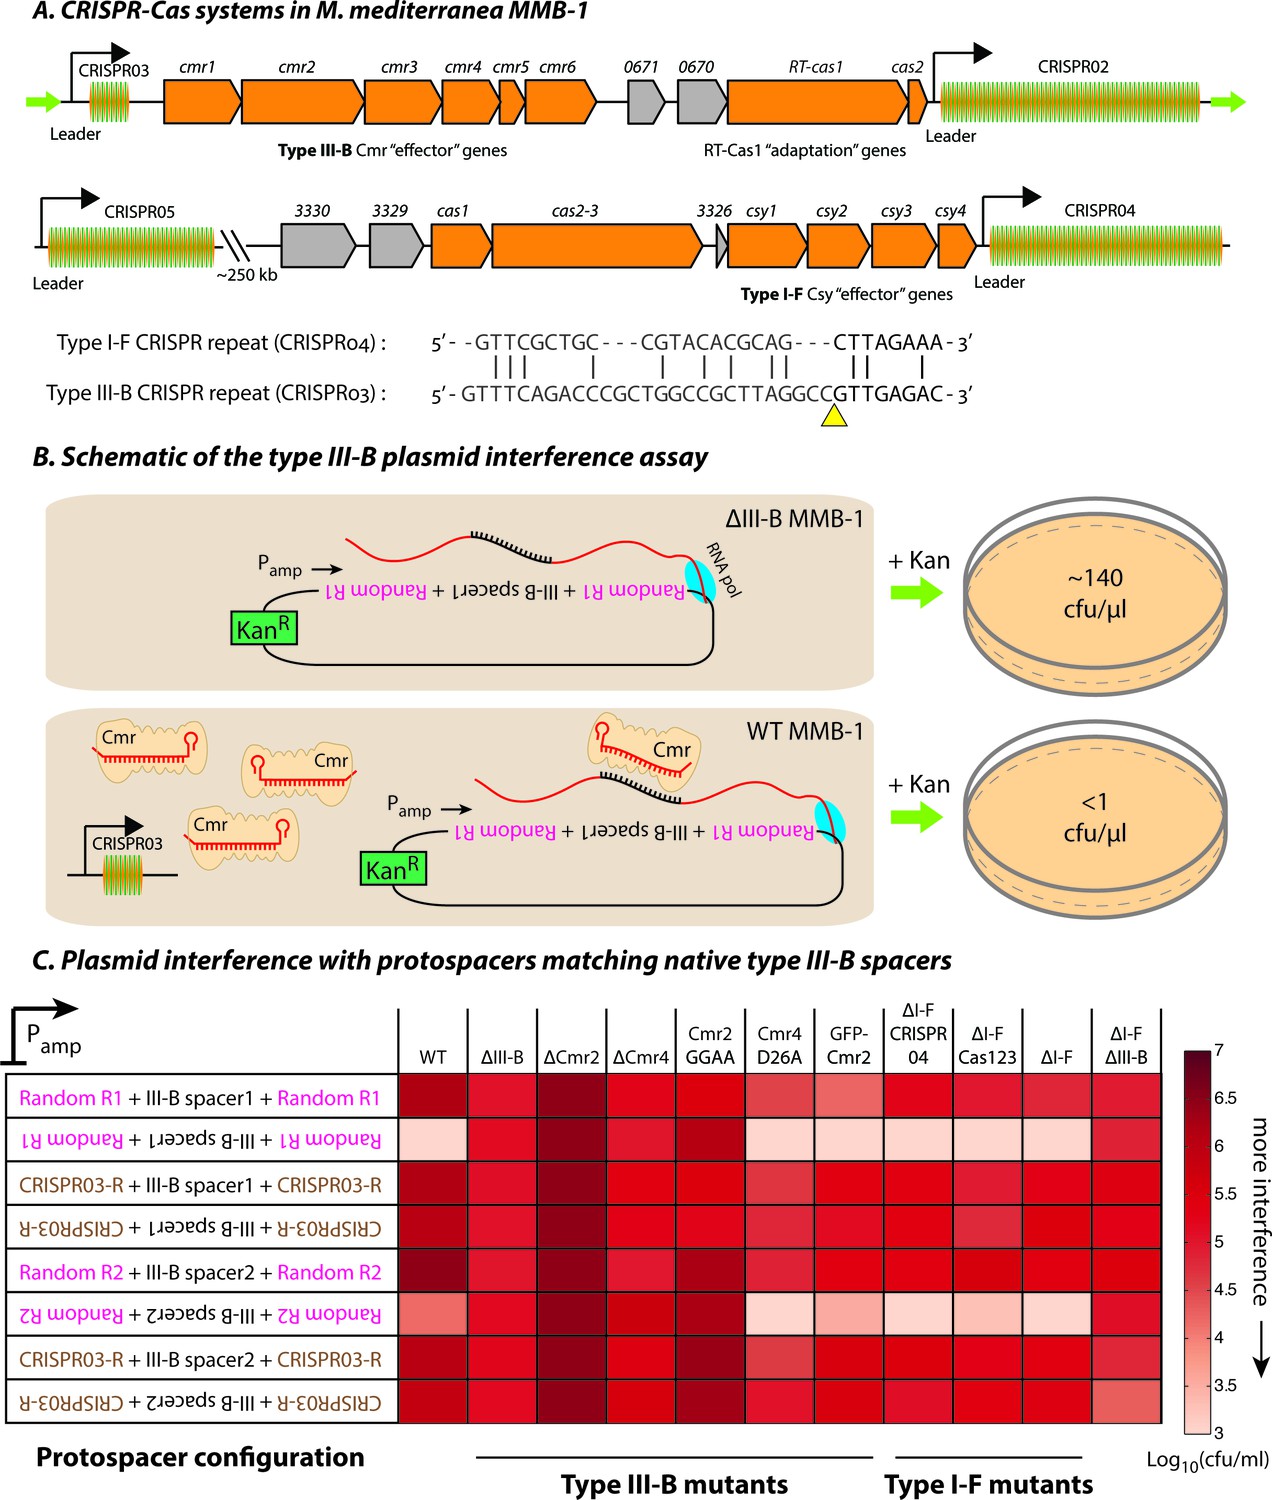 Type Iii Crispr Cas Systems Can Provide Redundancy To Counteract Viral Escape From Type I Systems Elife